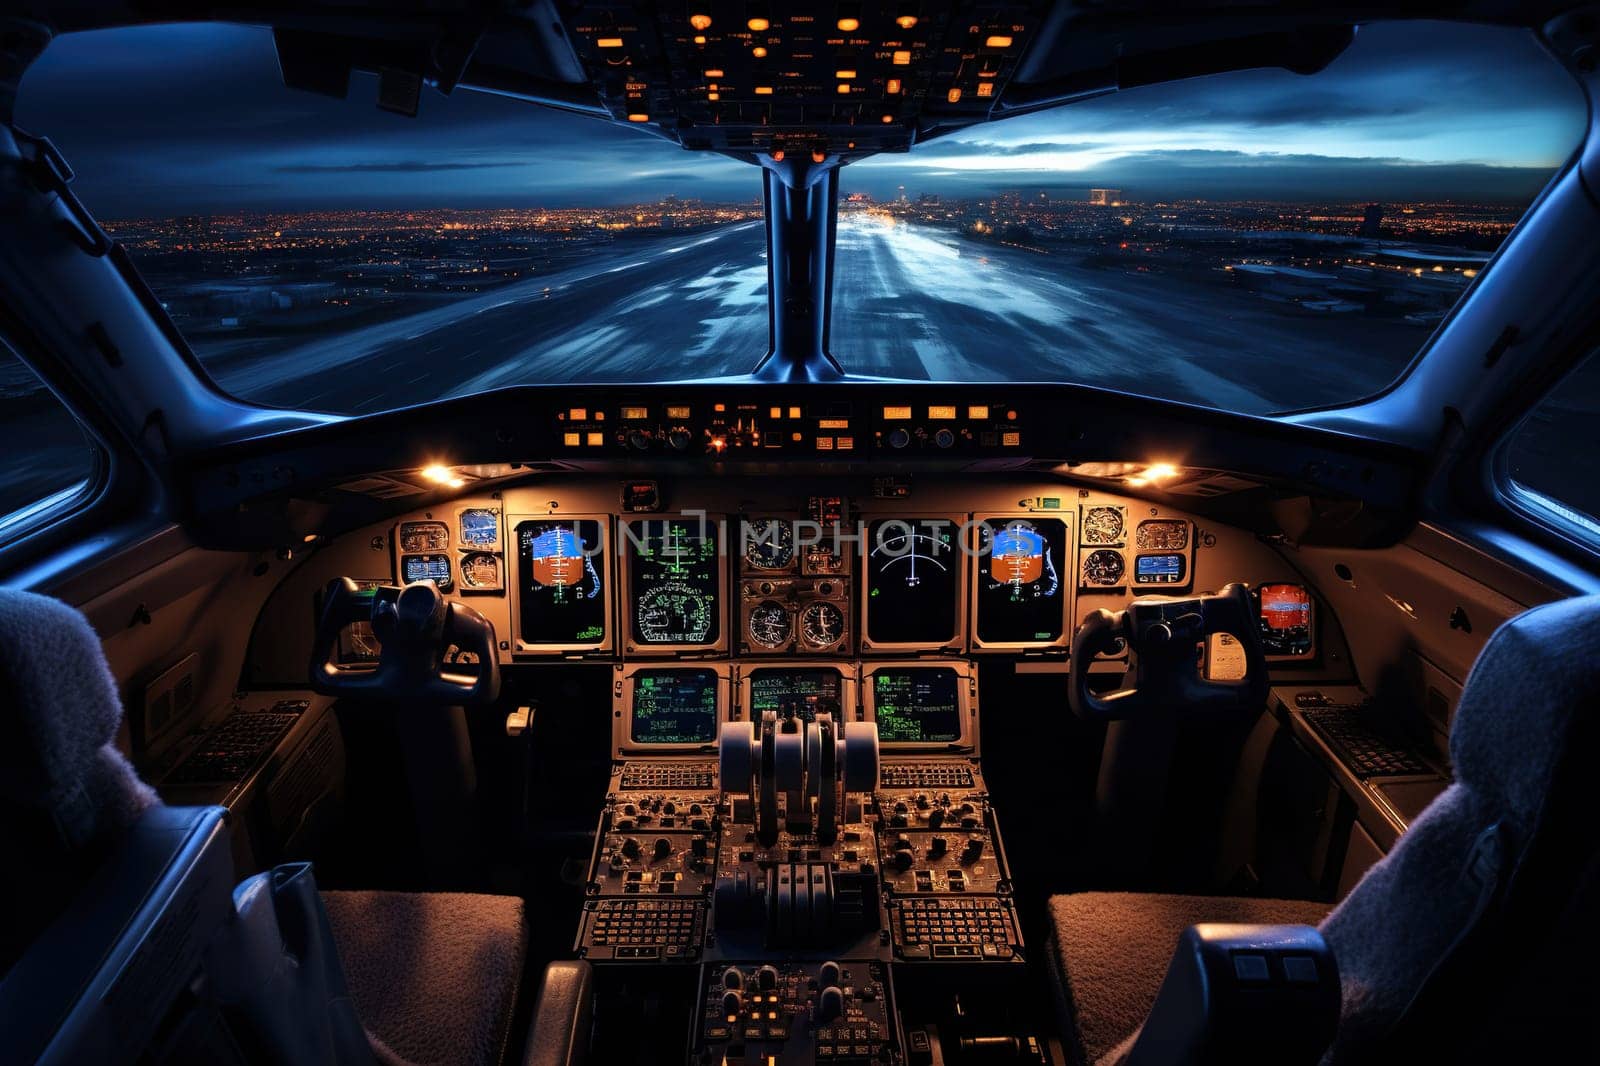 Inside view of an airplane cockpit with a glowing instrument panel.